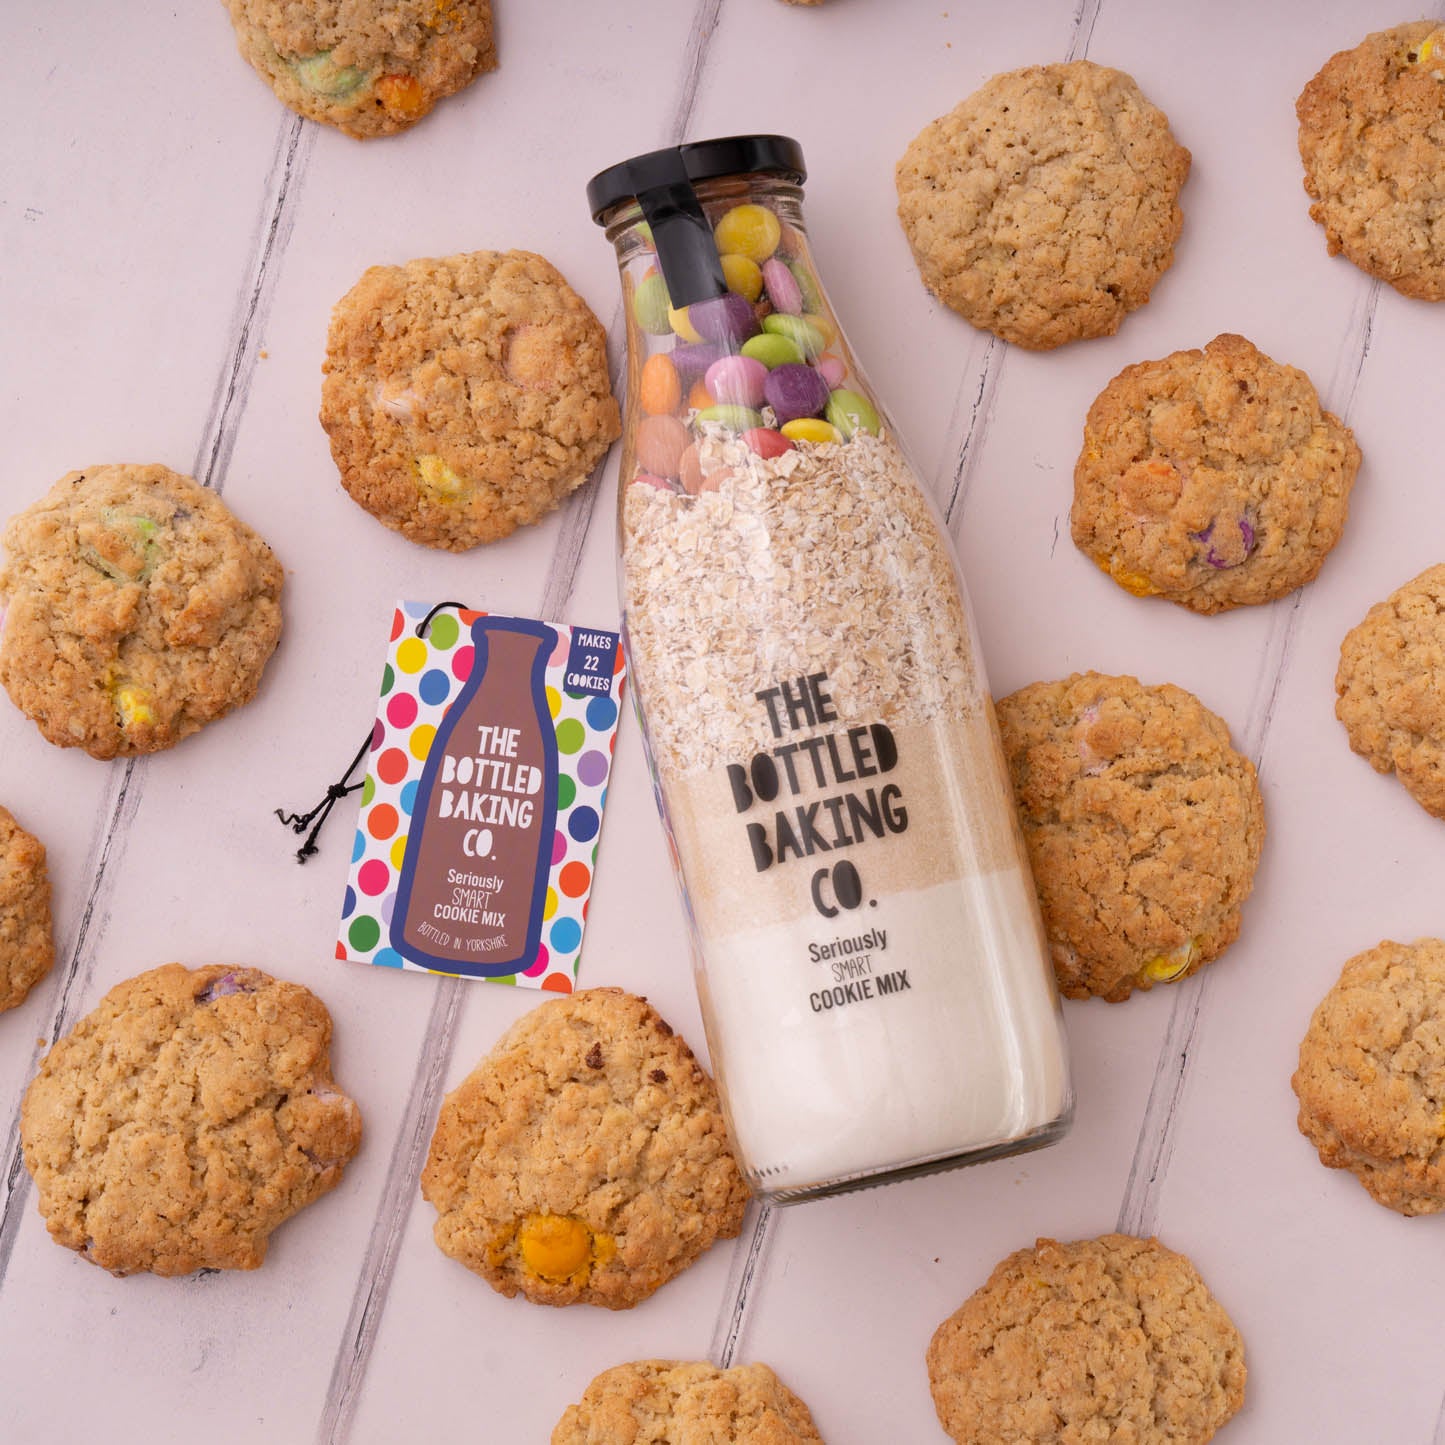 Seriously smart cookie mix in a bottle